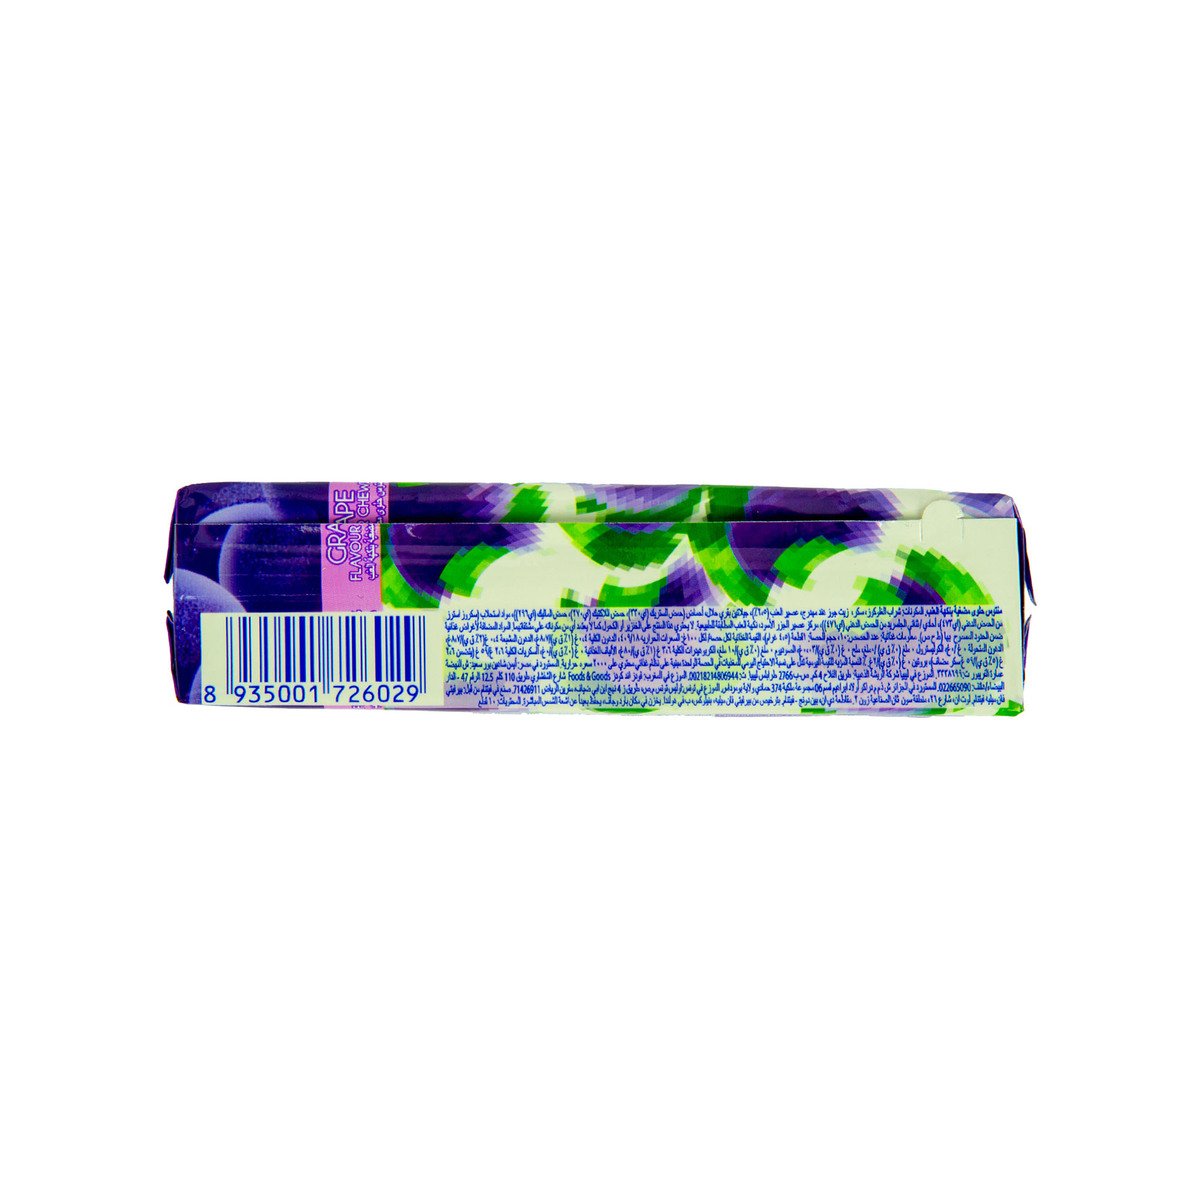 Mentos Incredible Chew with Grape Flavour, 45 g